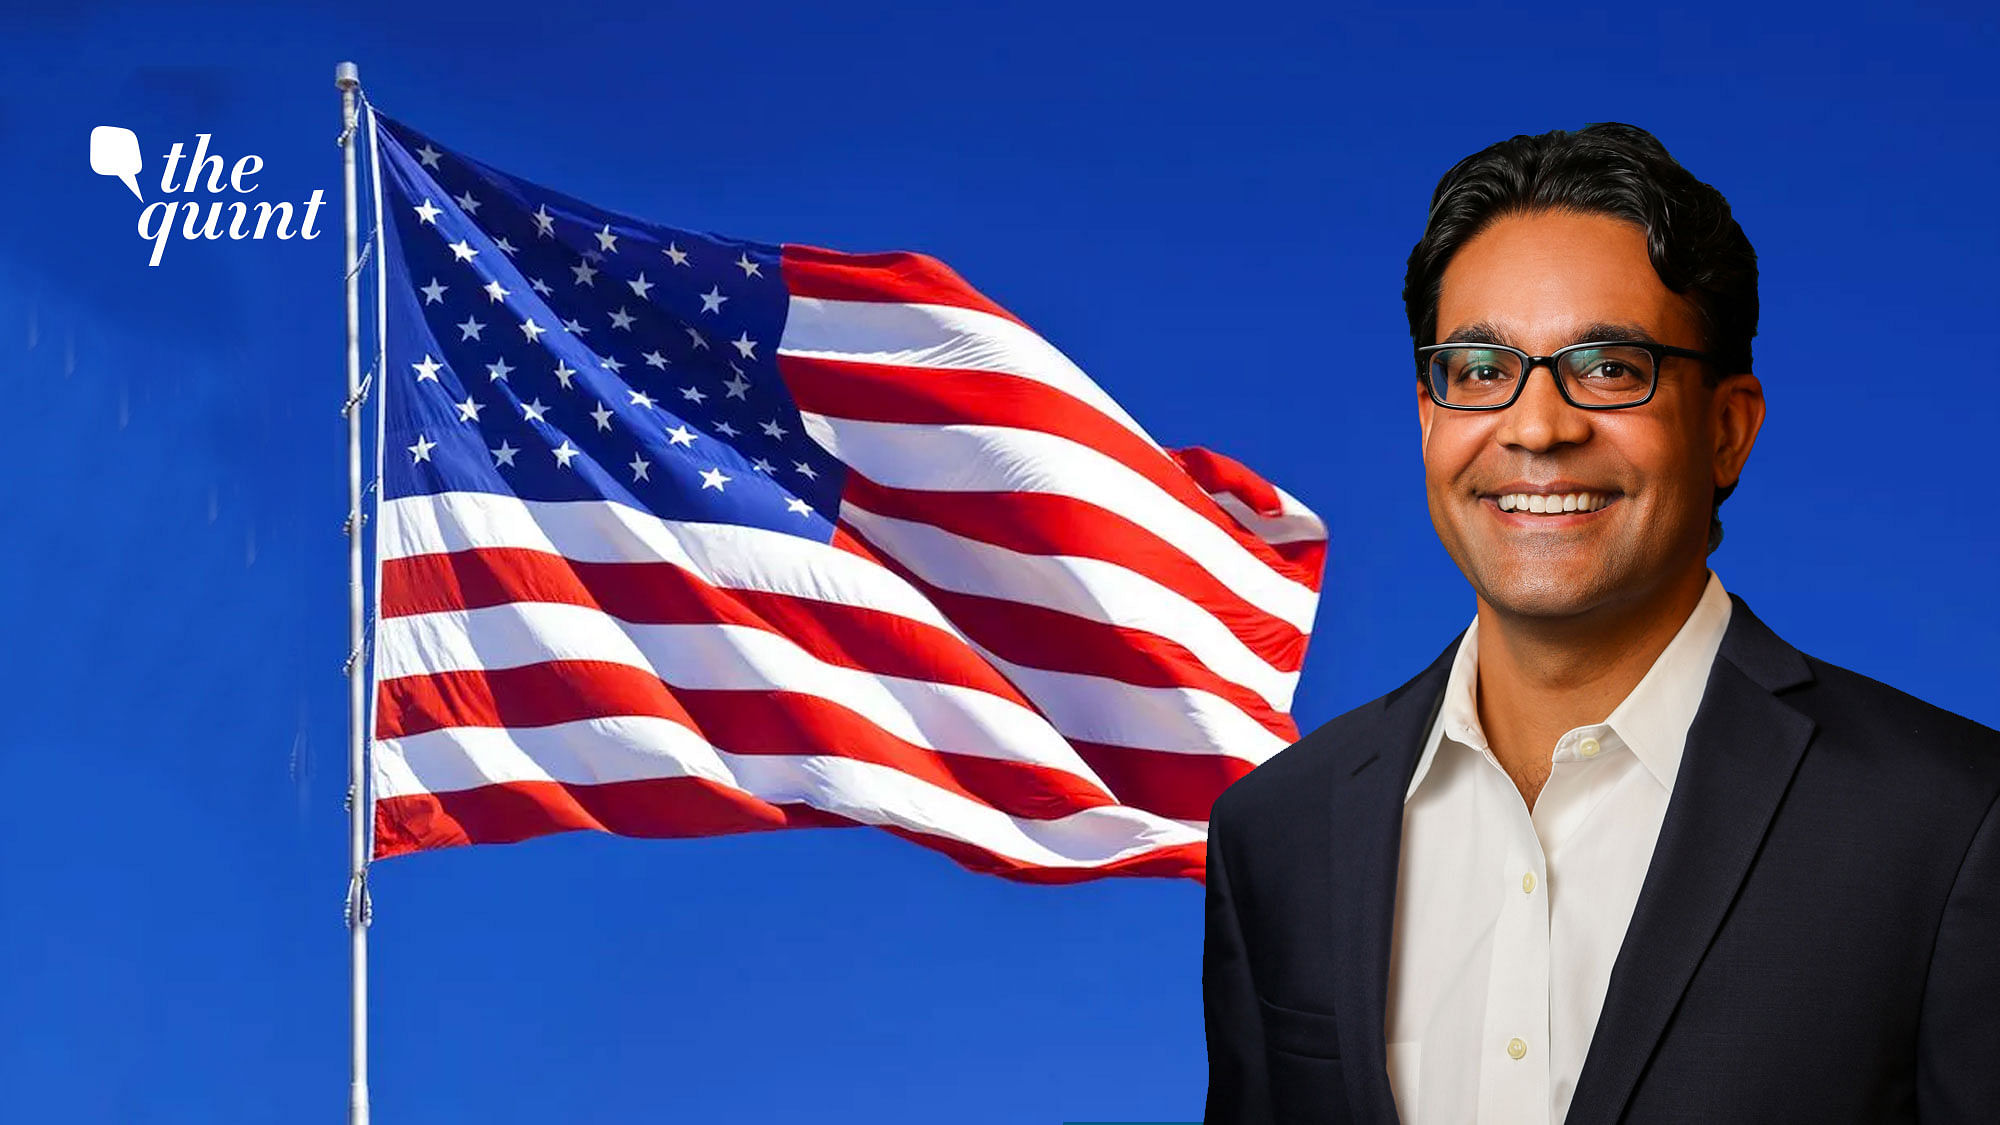 Image of American flag and Milan Vaishnav, the author of this op-ed, used for representational purposes.